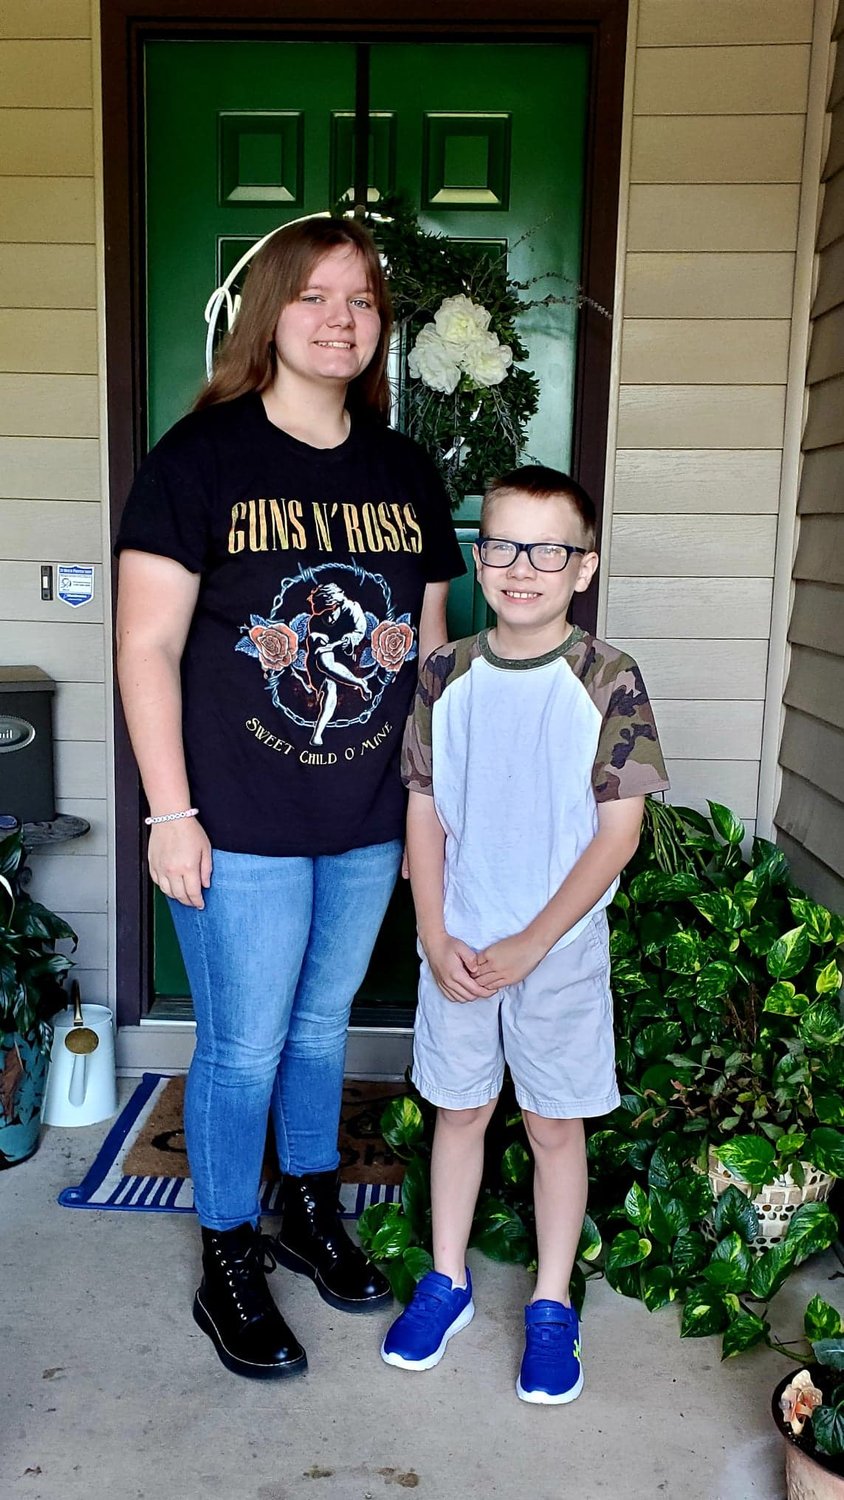 Madison (left) and Nathan (right) ready for the first day of the 2021-22 school year. “I usually just wait until there is a sale…I wish they did a week long one (tax free weekend) vs. just a weekend,” shared their mom Jessica Ragsdale